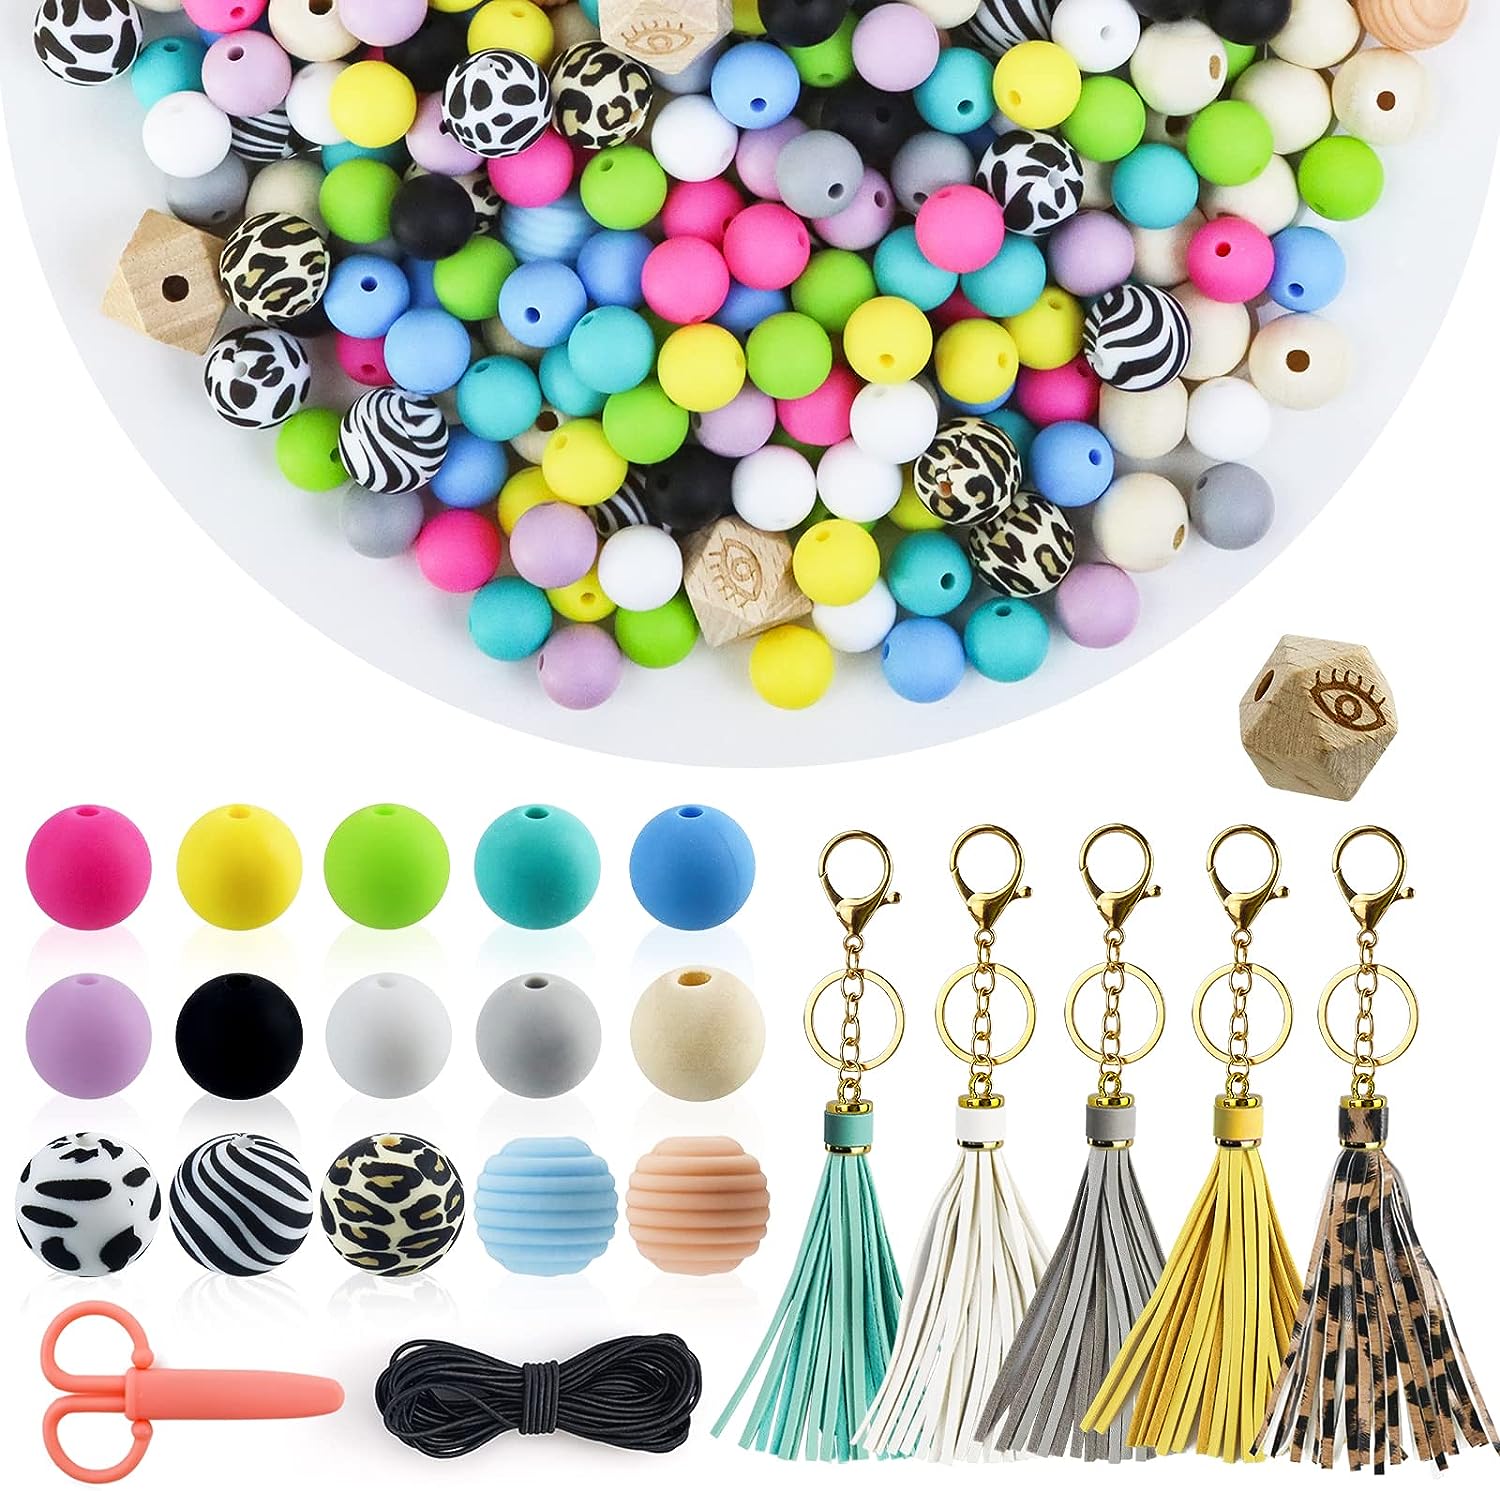 TXIN 53 Pcs Silicone Beads for Keychain Making Kit, 15mm Rubber Beads Set  with Tassel and String, Colorful Loose Spacer Beads, DIY Jewelry Craft  Beads